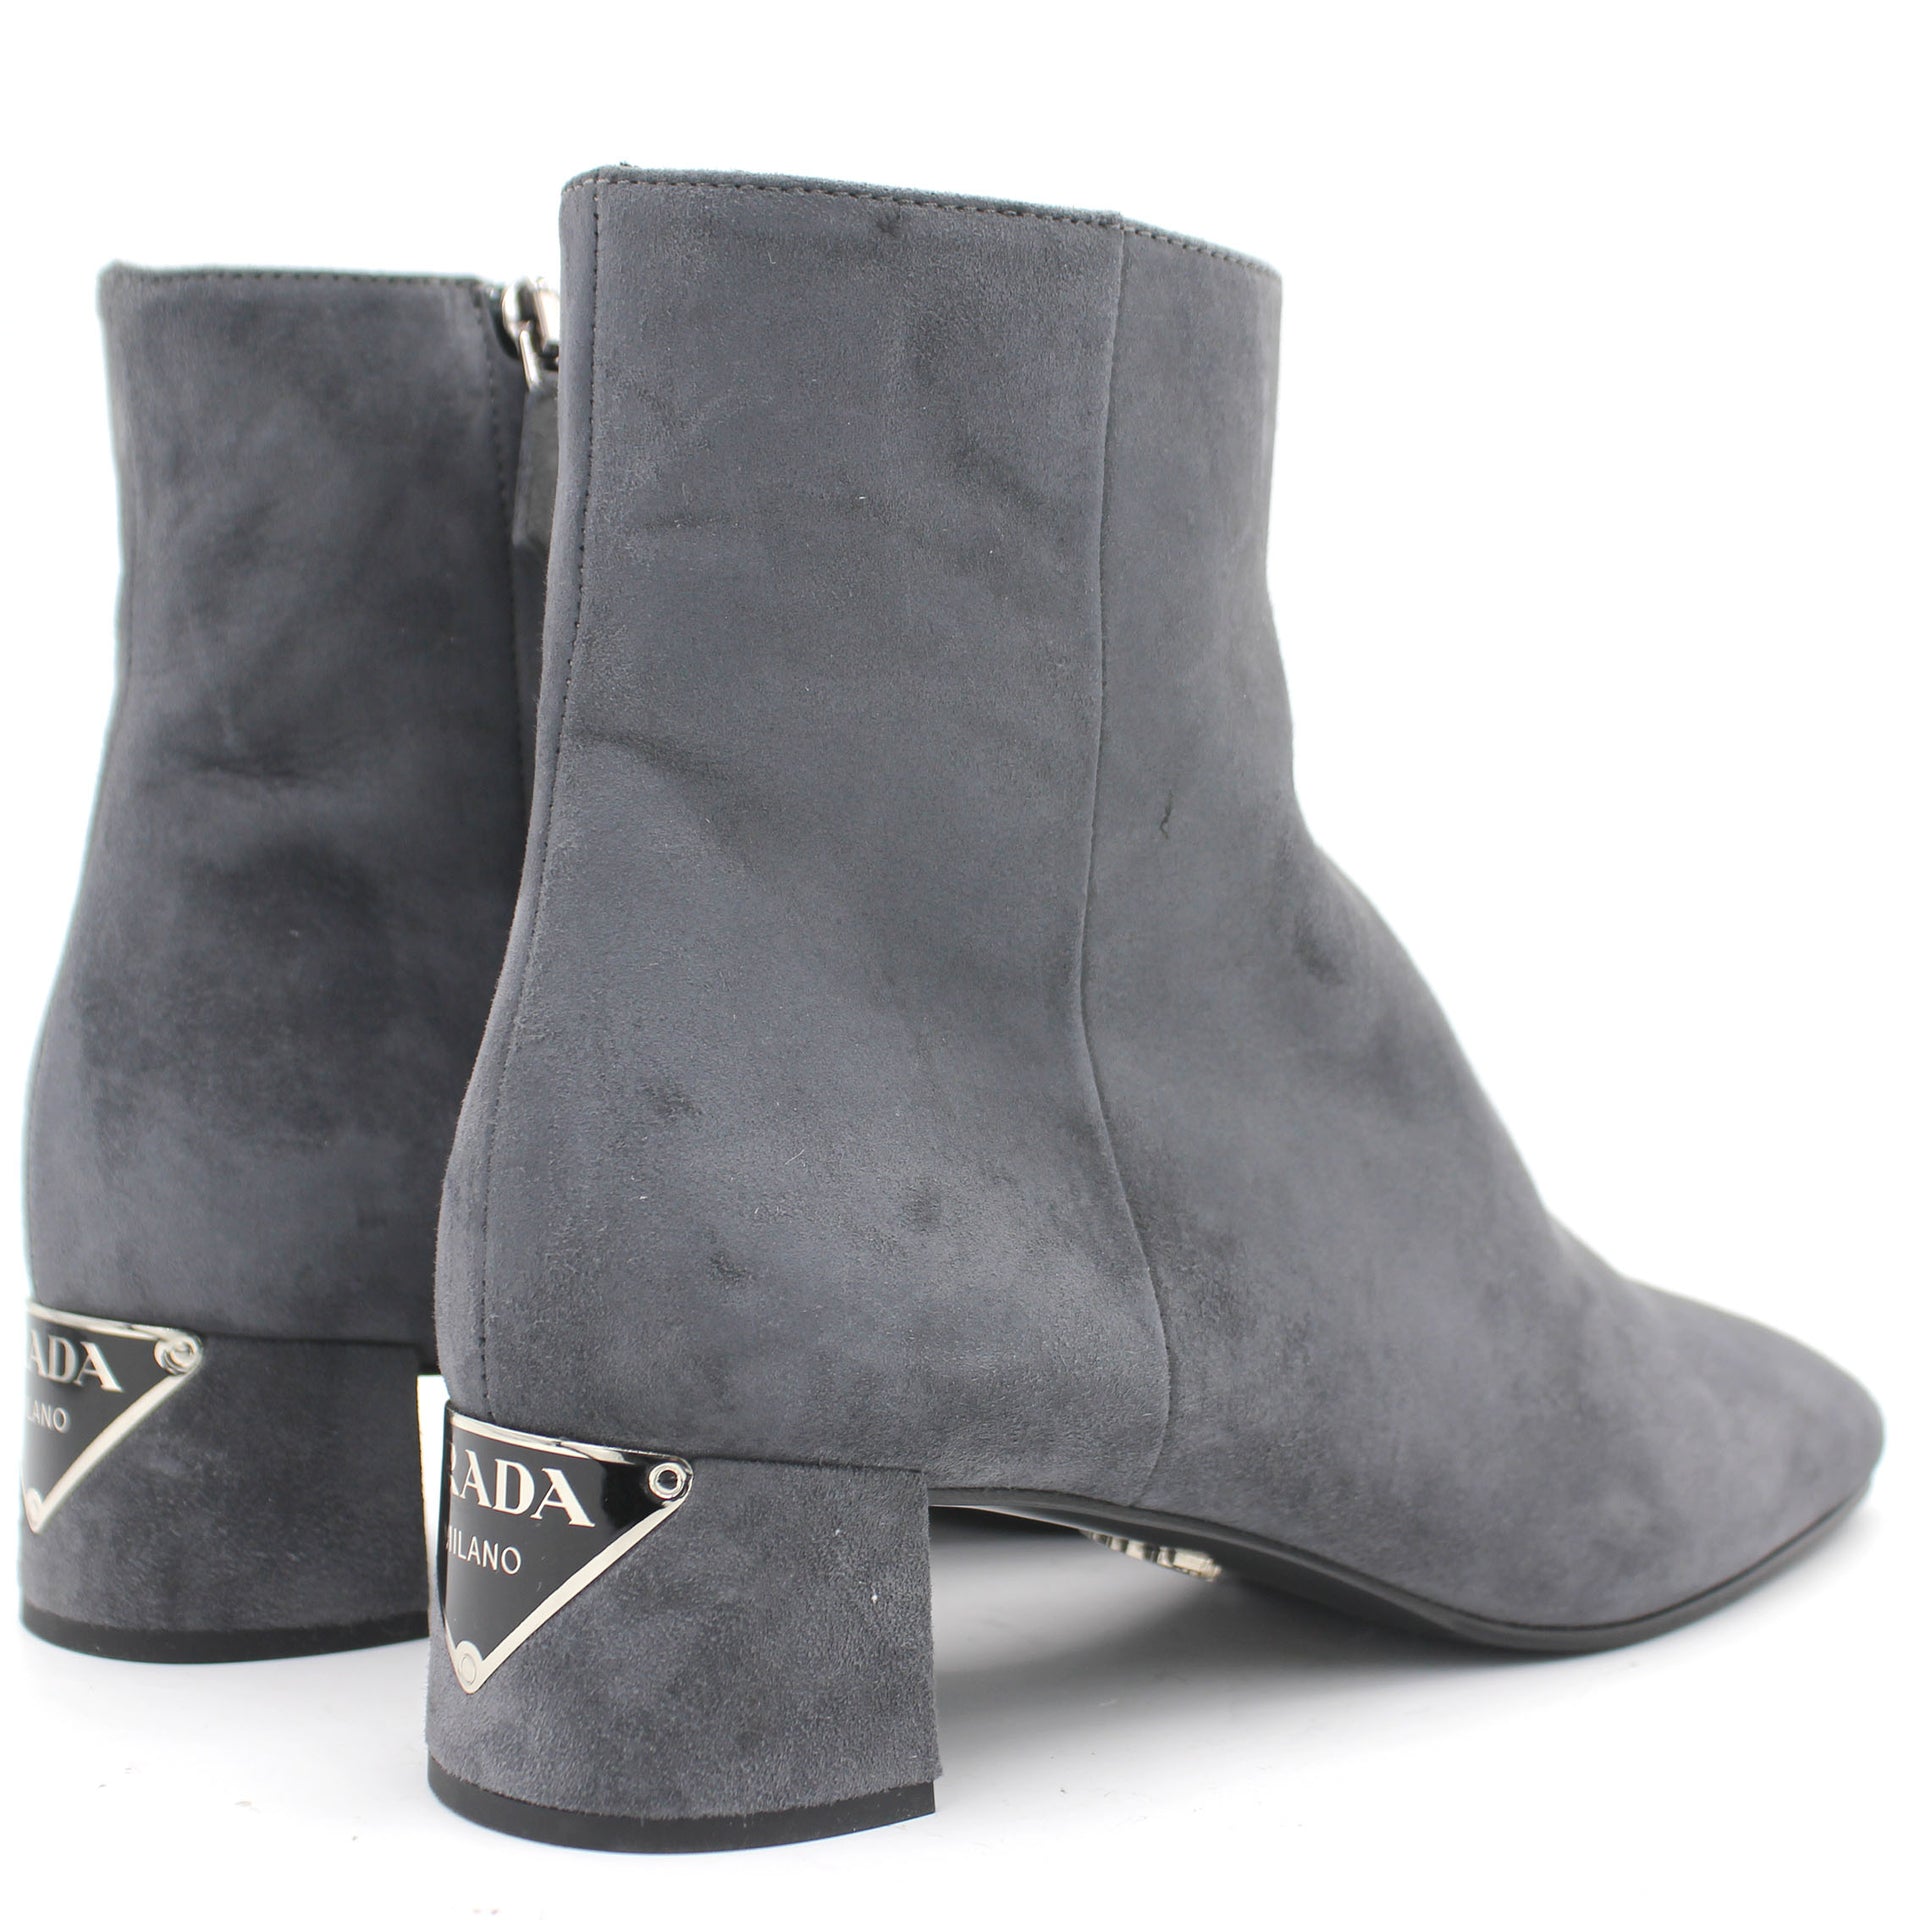 Suede Square-Toe Grey Ankle Boots 38.5